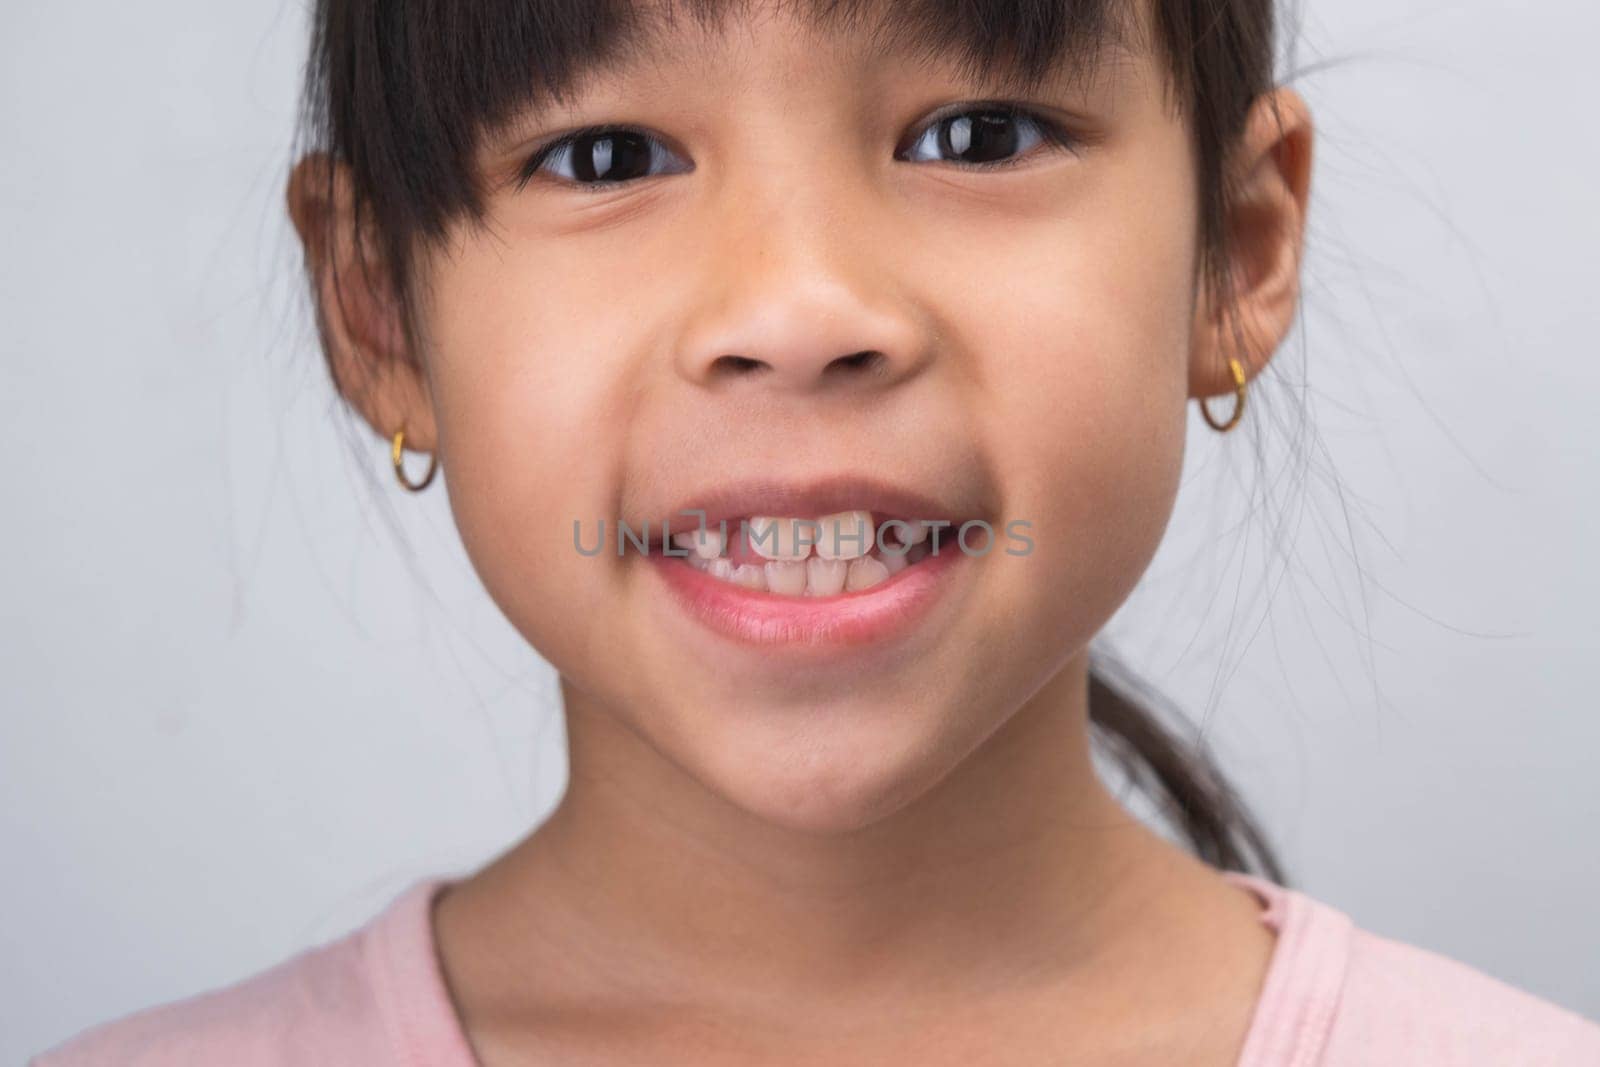 Close-up of cute young girl smiling wide, showing empty space with growing first front teeth. Little girl with big smile and missing milk teeth. Dental hygiene concept by TEERASAK